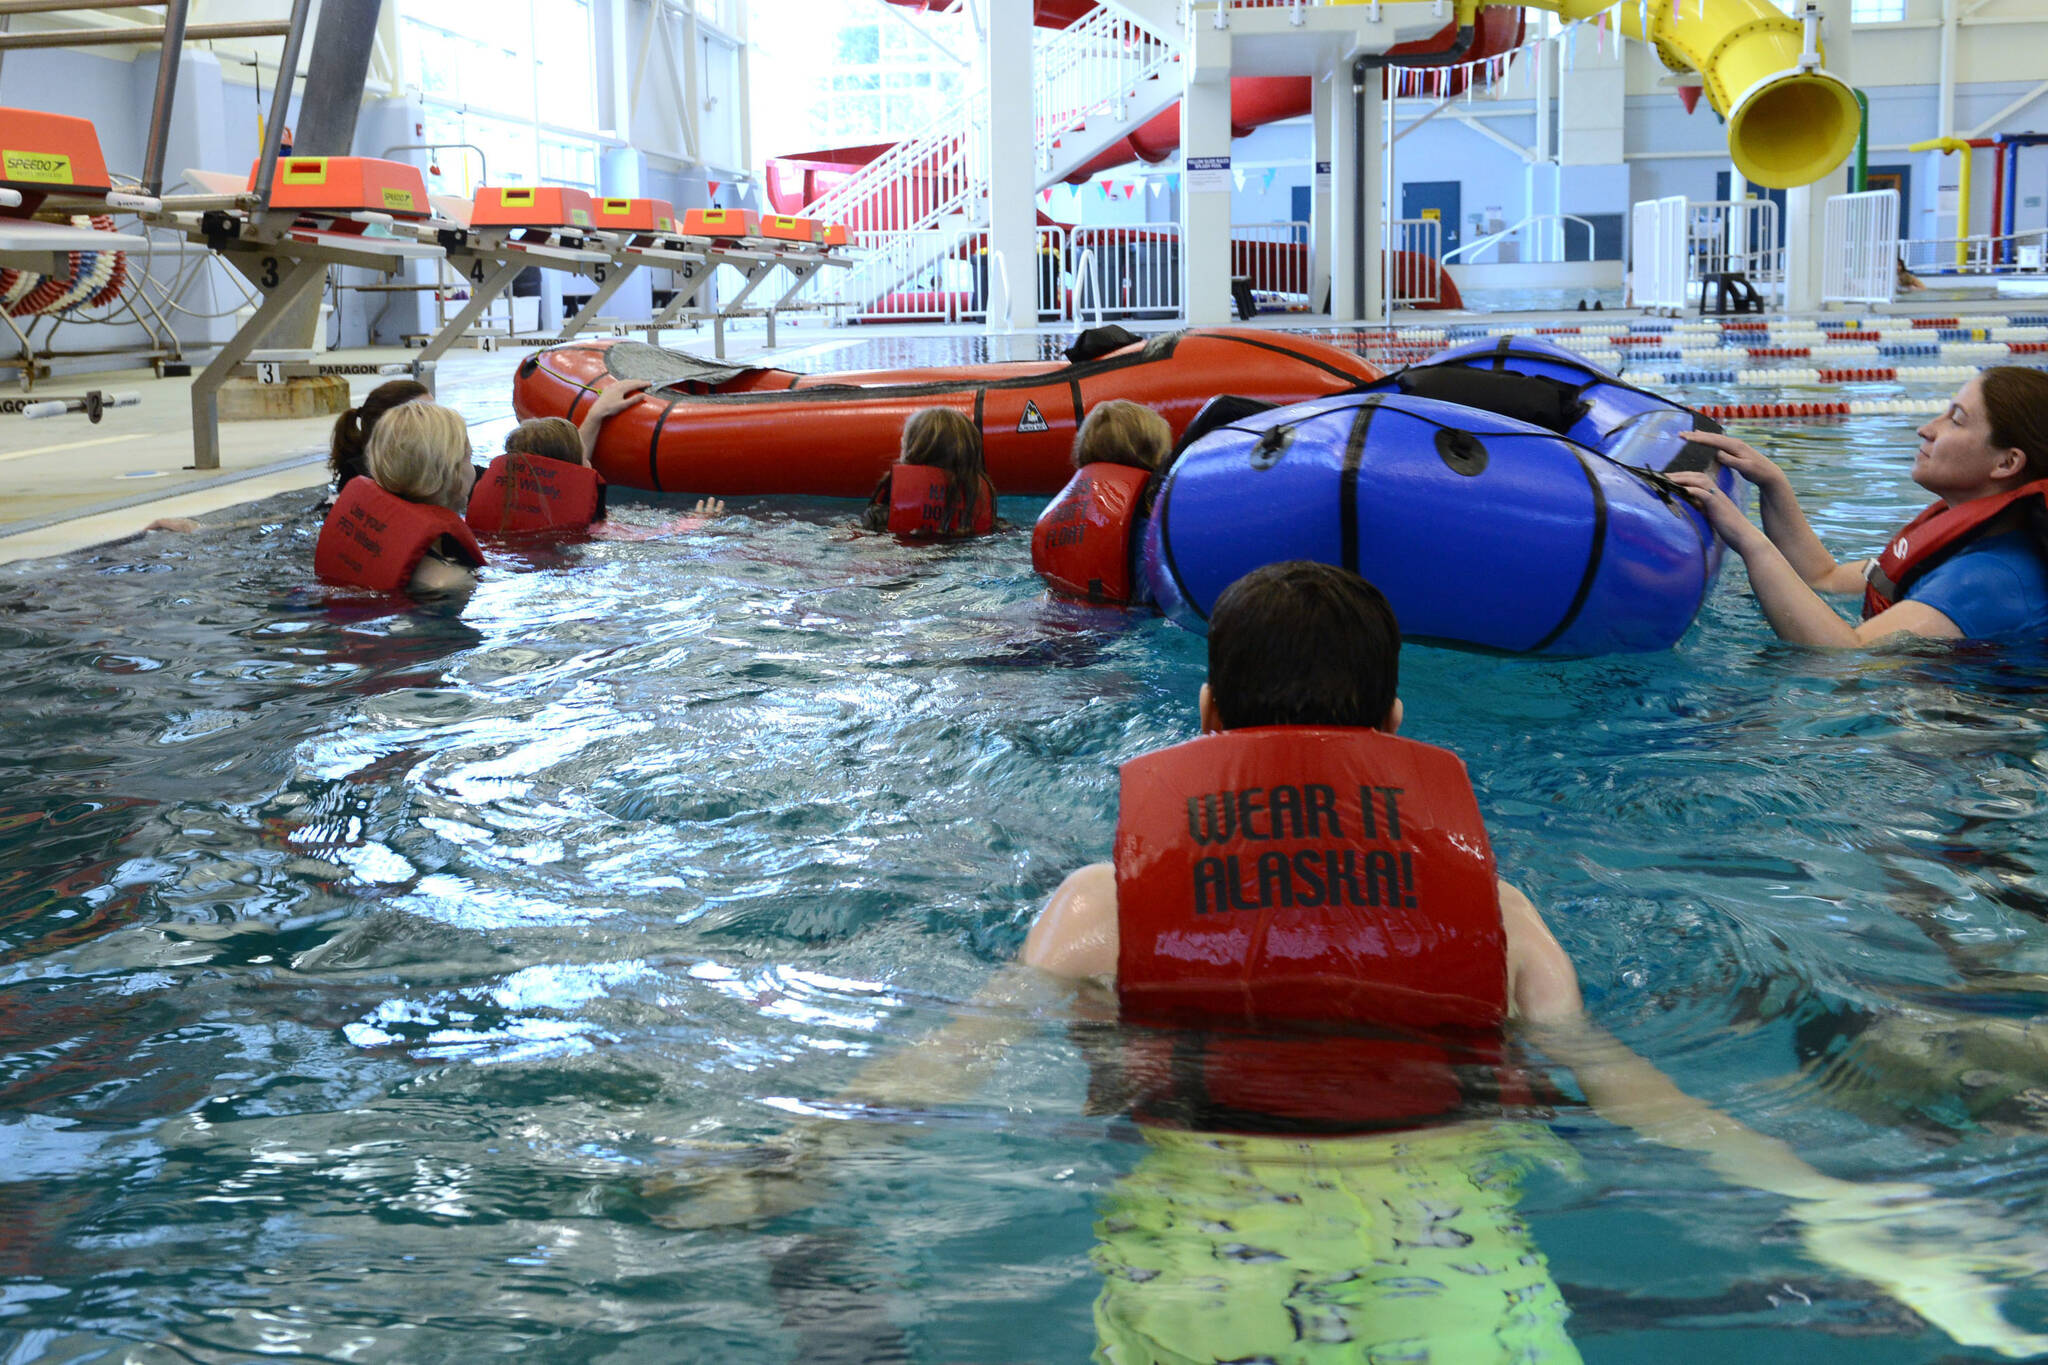 Soon-to-be instructors from the Goldbelt Heritage Foundation, Xheighaa Warrior Veteran Canoe Journey, Coast Guard Sector Juneau, and the 17th Coast Guard District took part in a Kids Don’t Float training session being held at Dimond Park Aquatic Center in Juneau, Alaska, April 13, 2022. (U.S. Coast Guard / Petty Officer 2nd Class Lexie Preston)